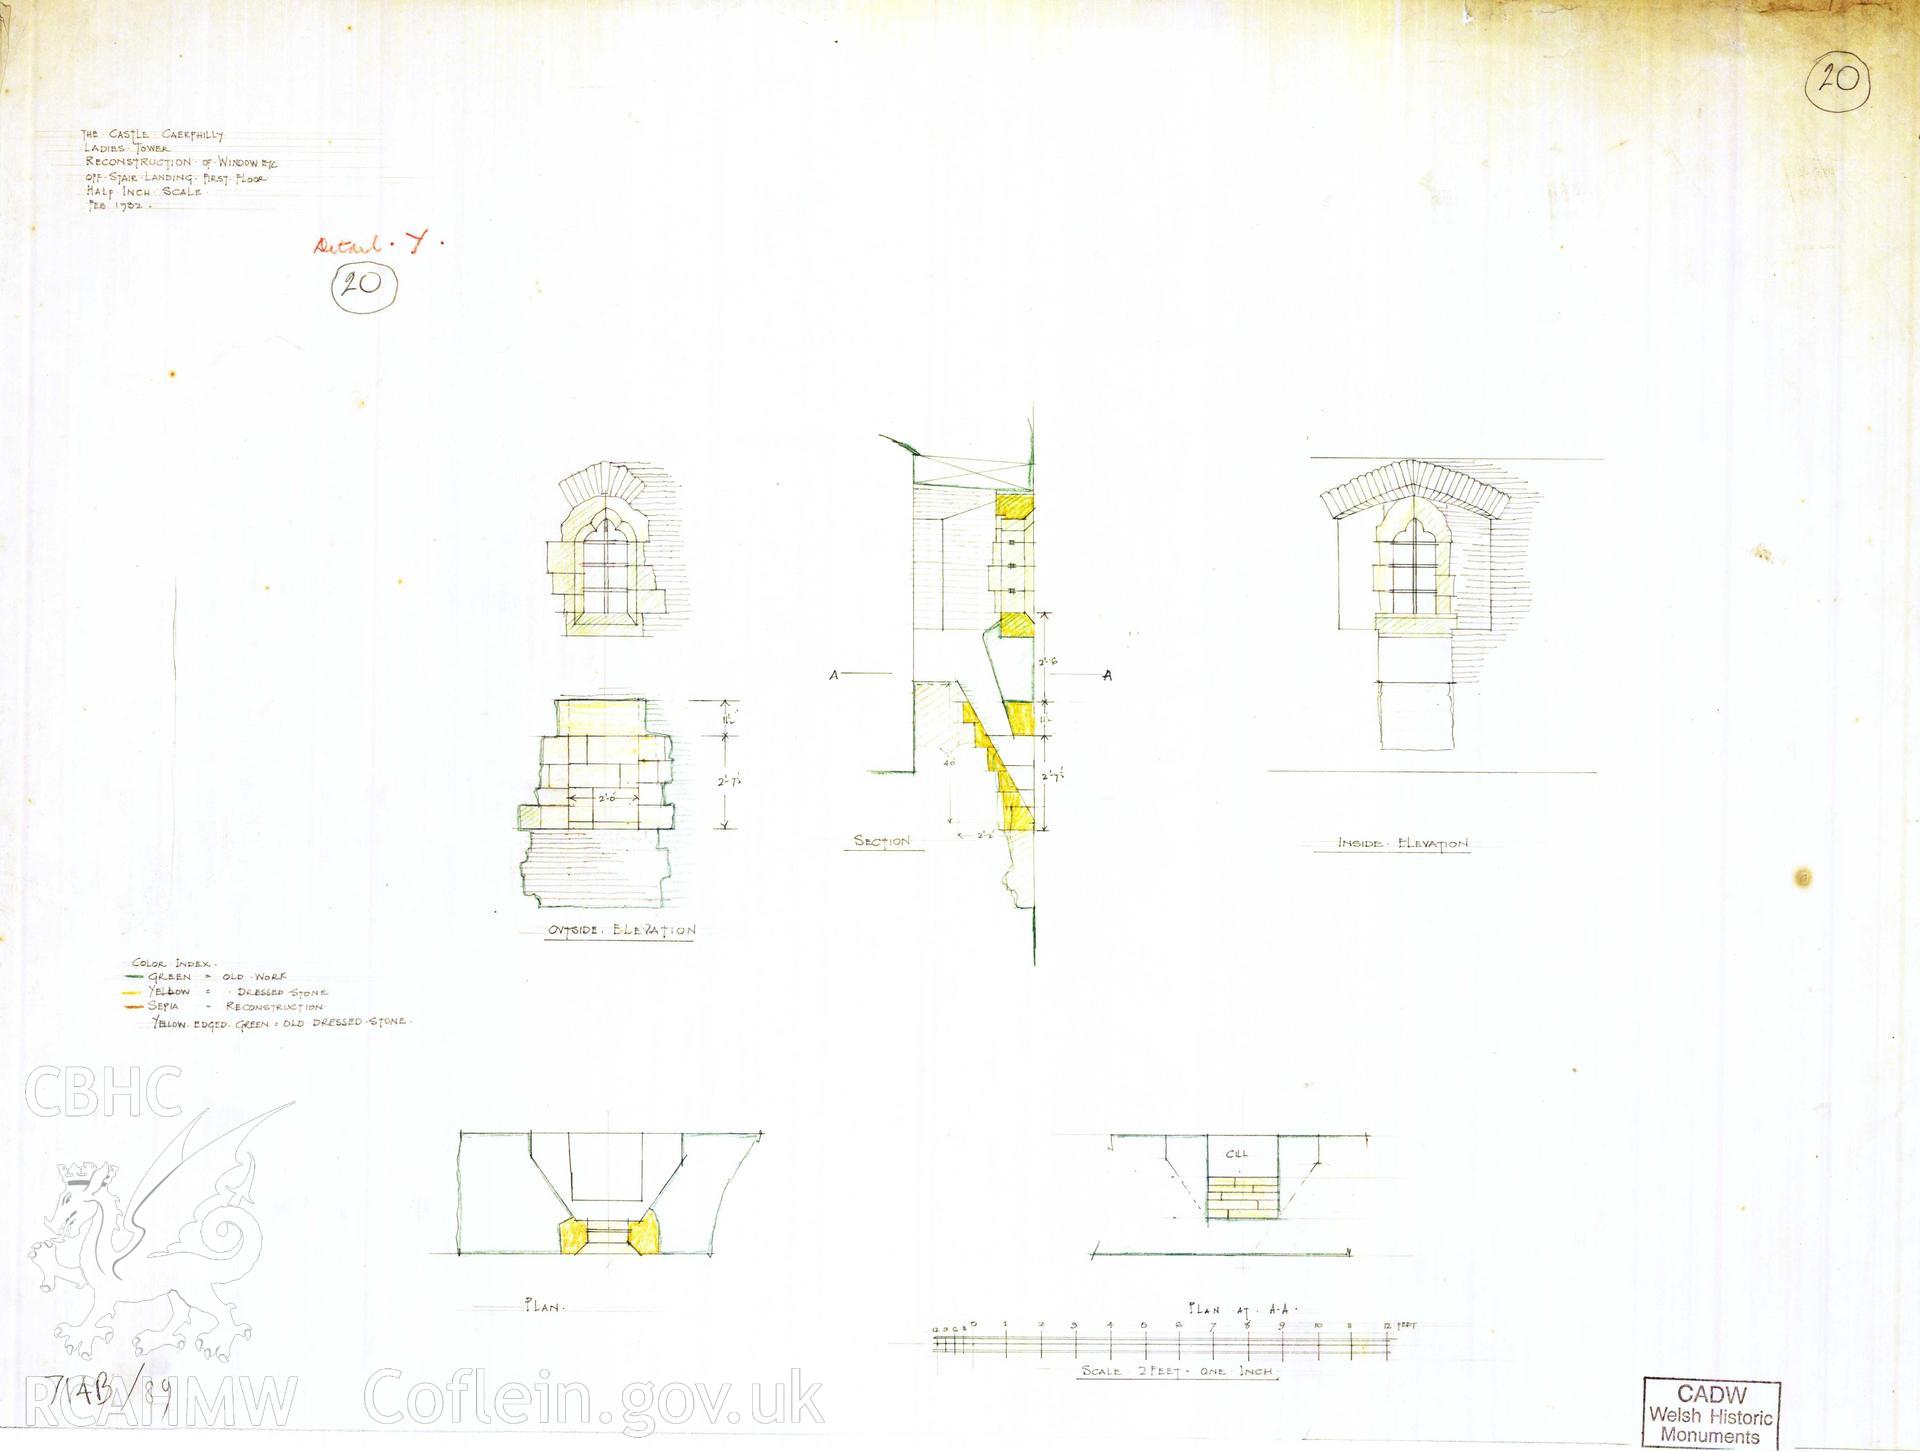 Digital copy of Cadw guardianship monument drawing of Caerphilly Castle. NW tower, upper fl landing window. Cadw ref. no: 714B/89. Scale 1:24.  Original drawing withdrawn and returned to Cadw at their request.